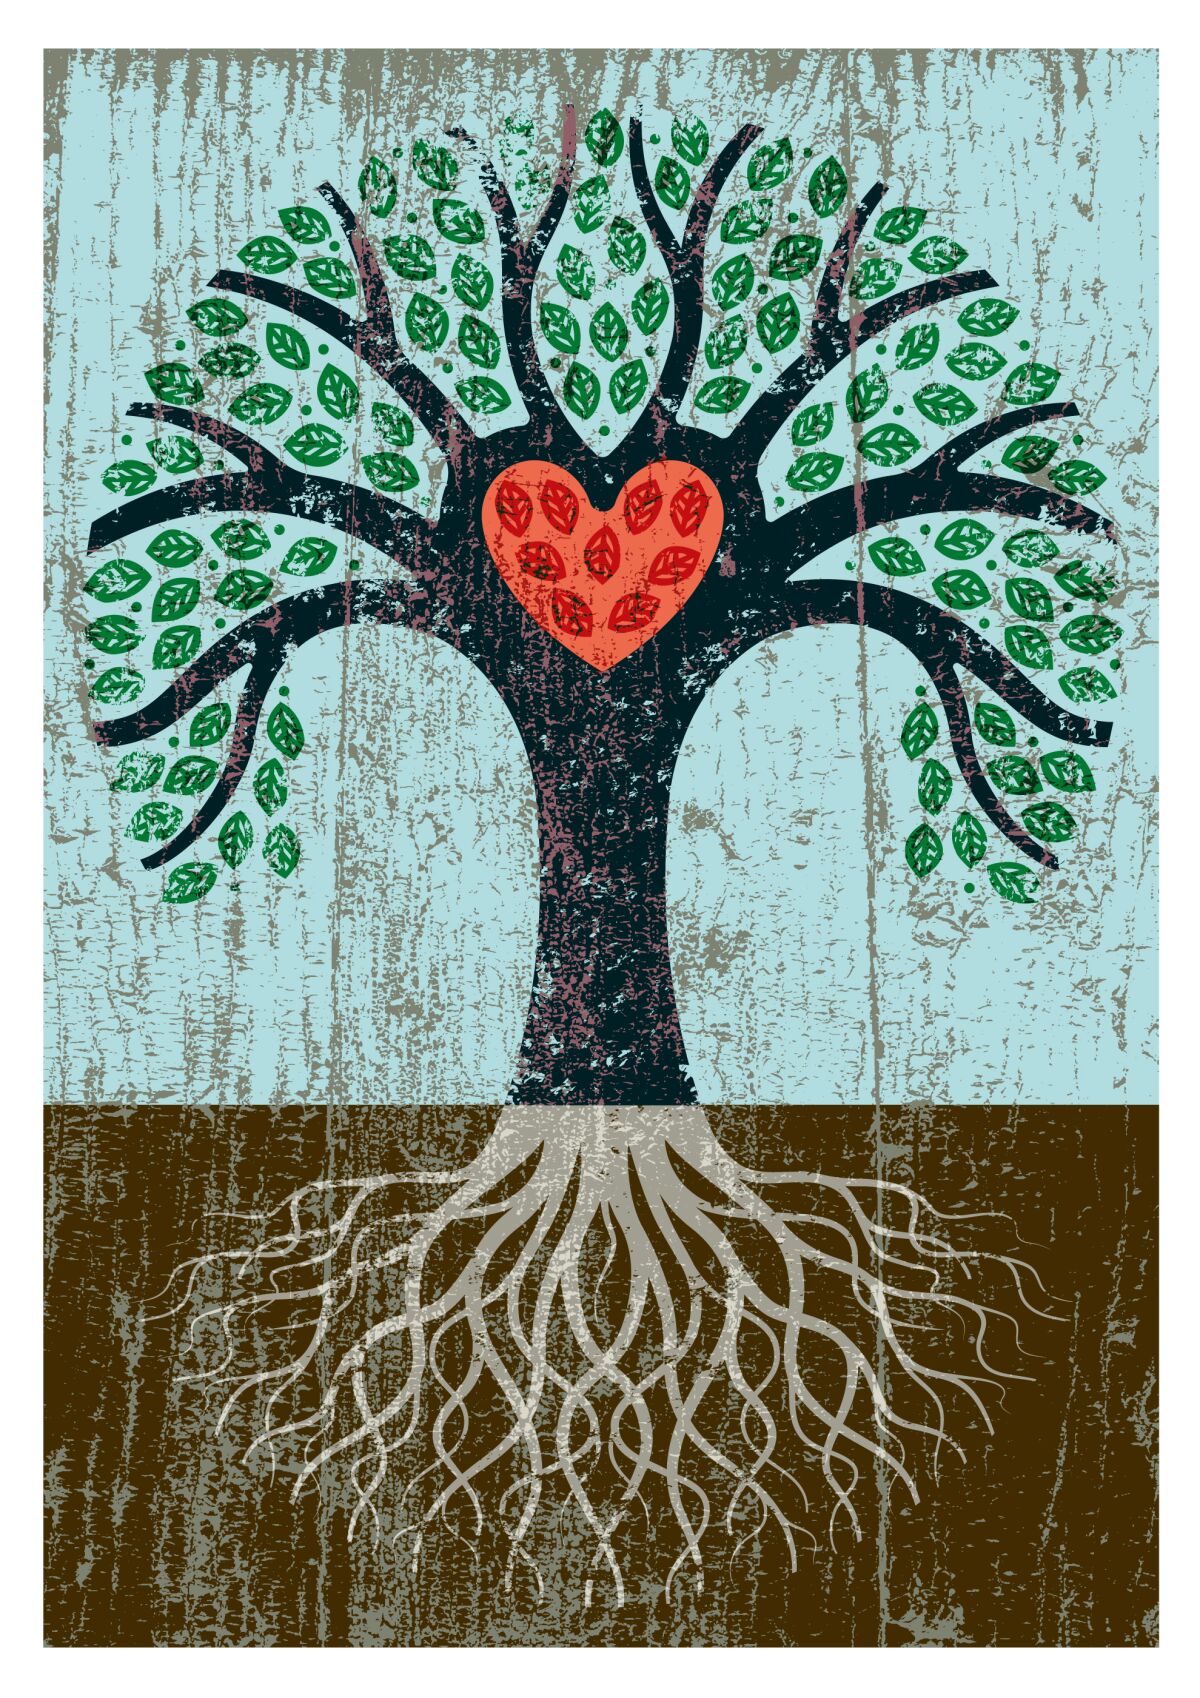 A little heart shaped tree with roots and a grungy texture applied and red heart